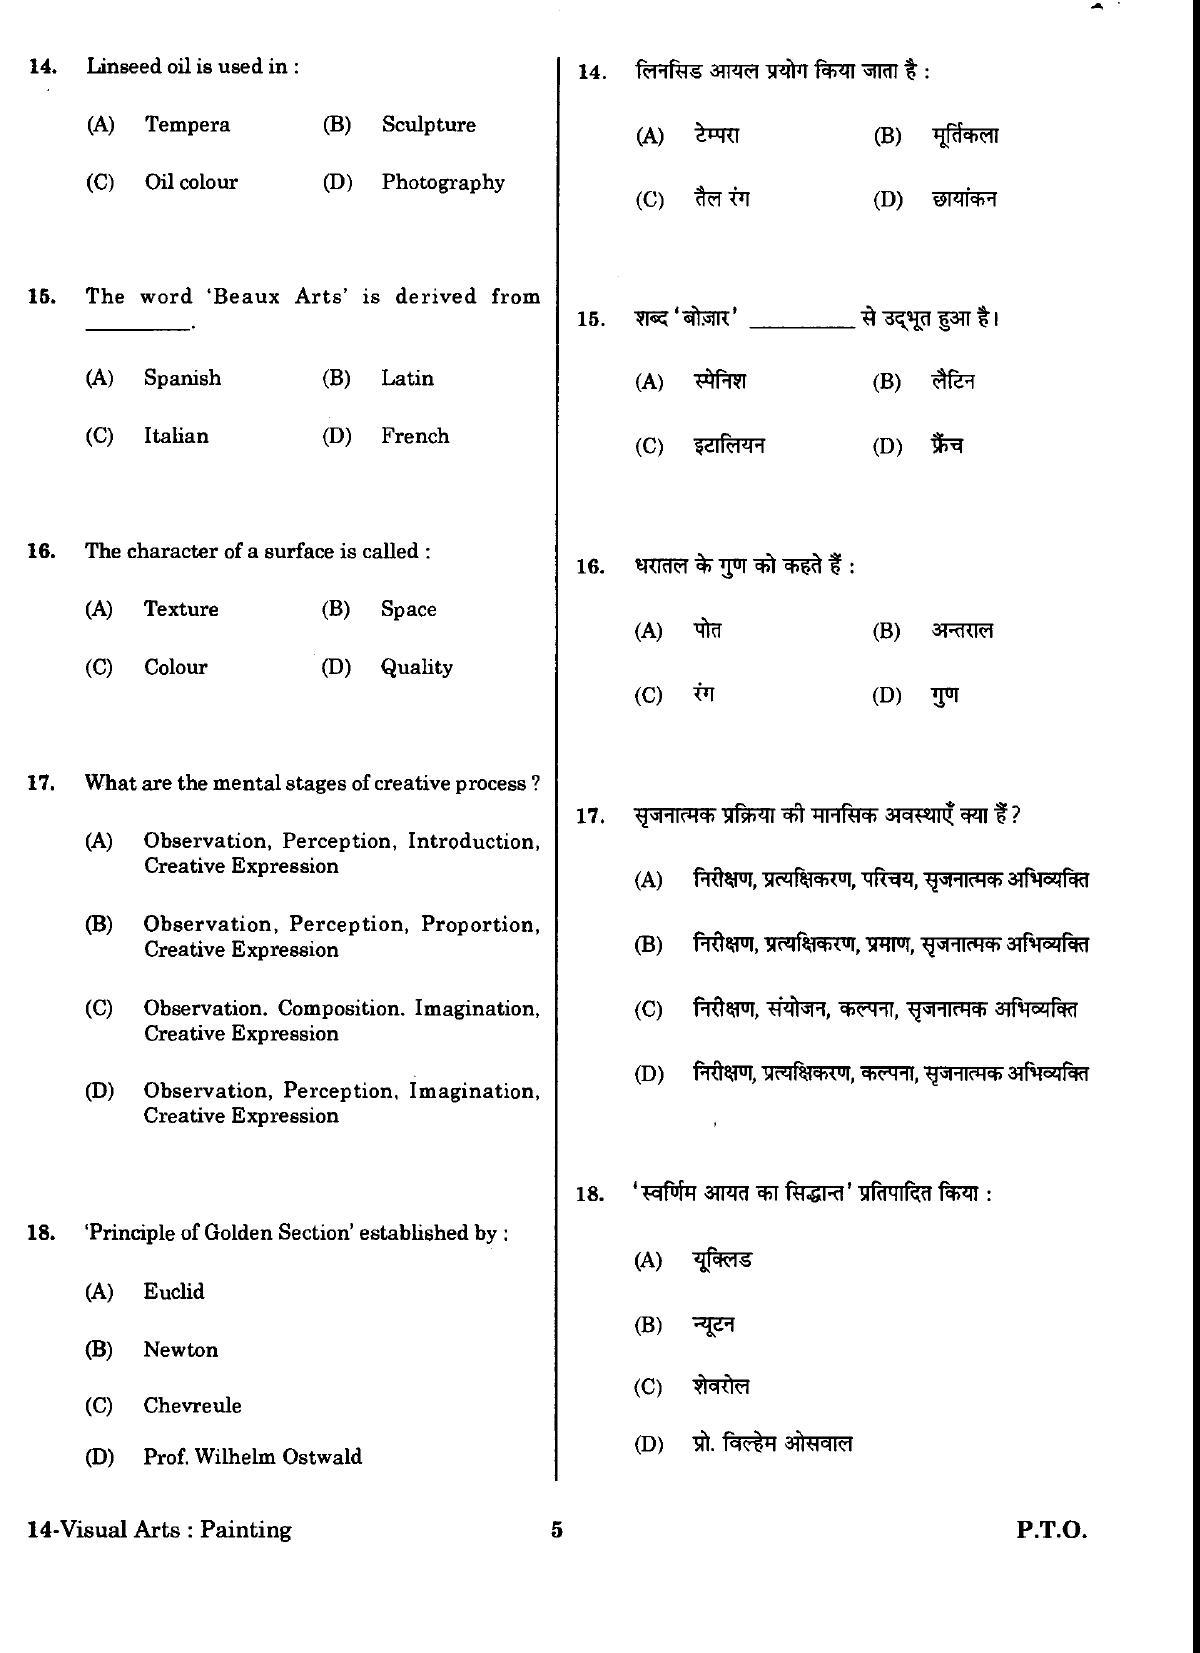 URATPG Visual Arts Painting Sample Question Paper 2018 - Page 4